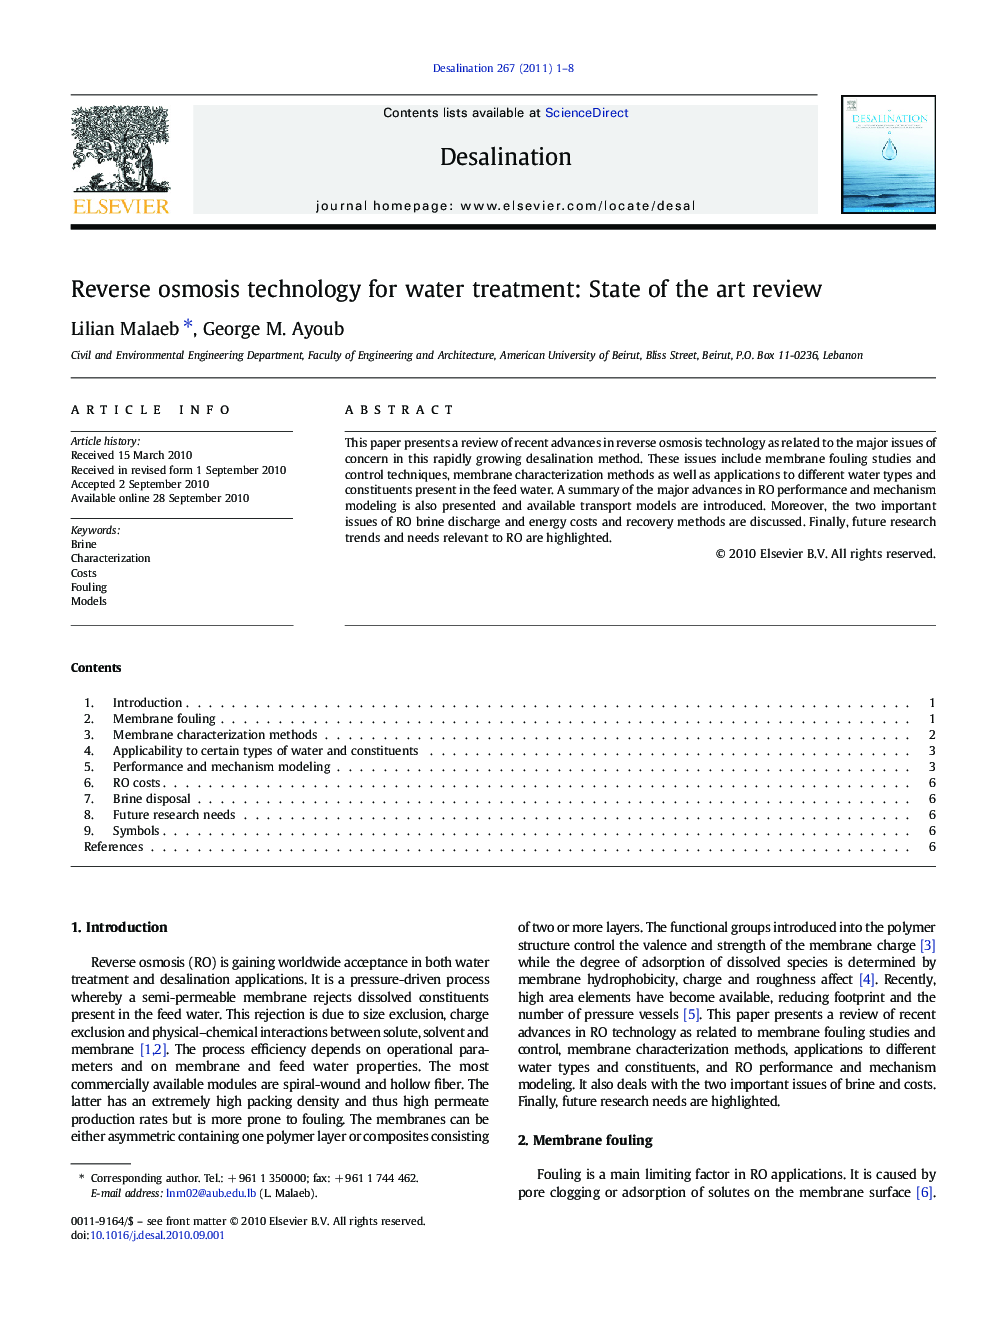 Reverse osmosis technology for water treatment: State of the art review